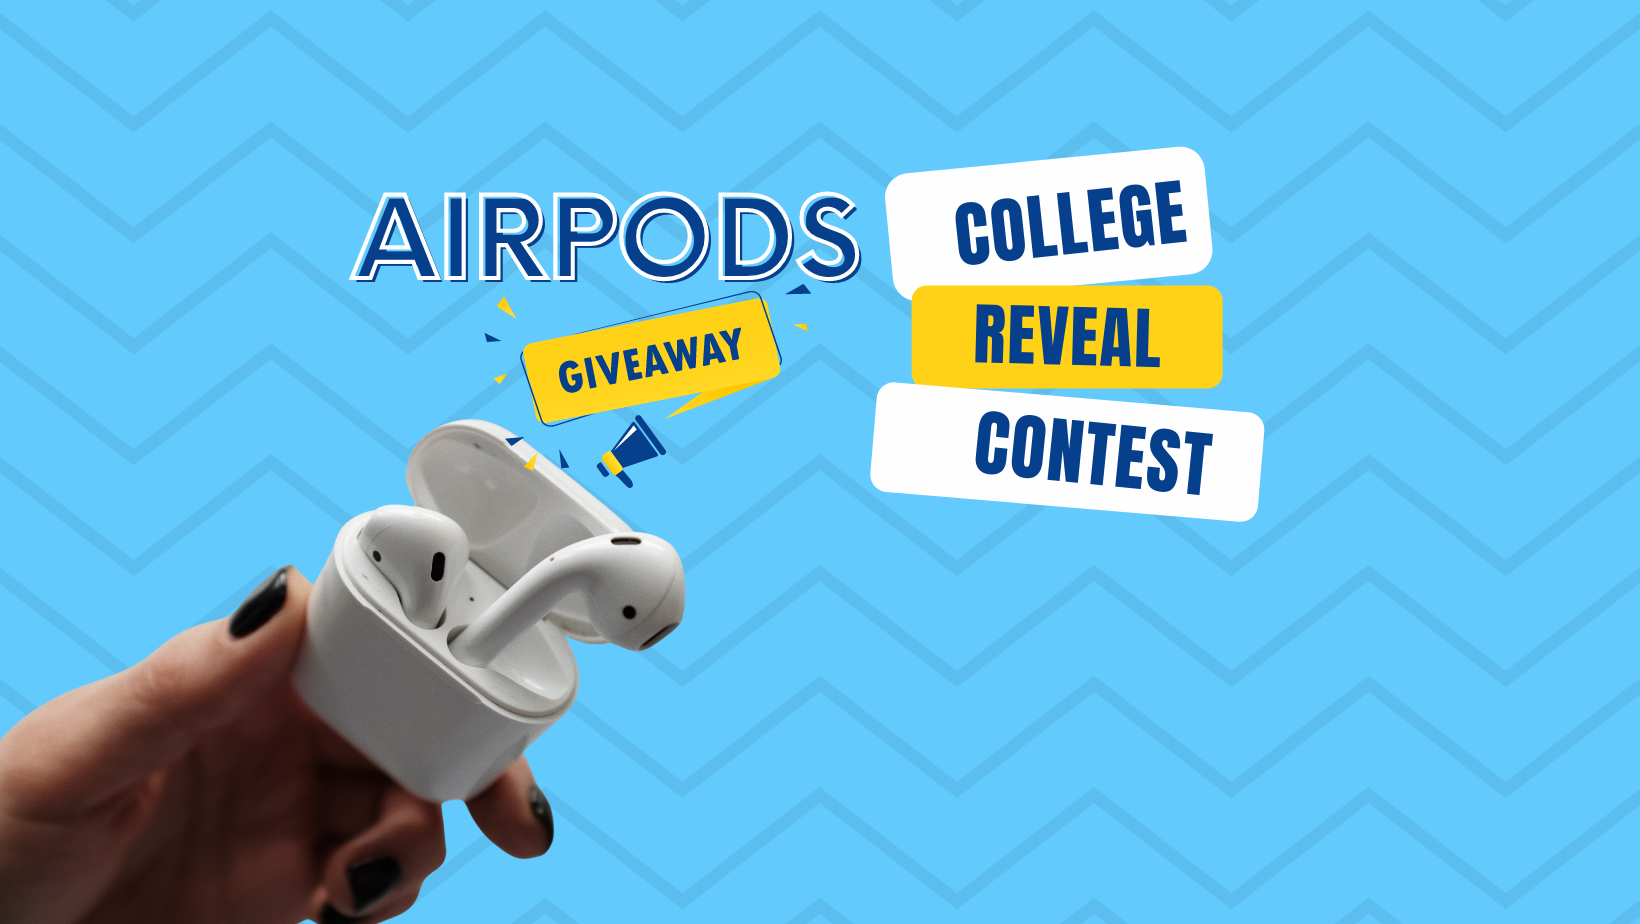 'College Reveal' Contest: Enter To Win Apple Airpods